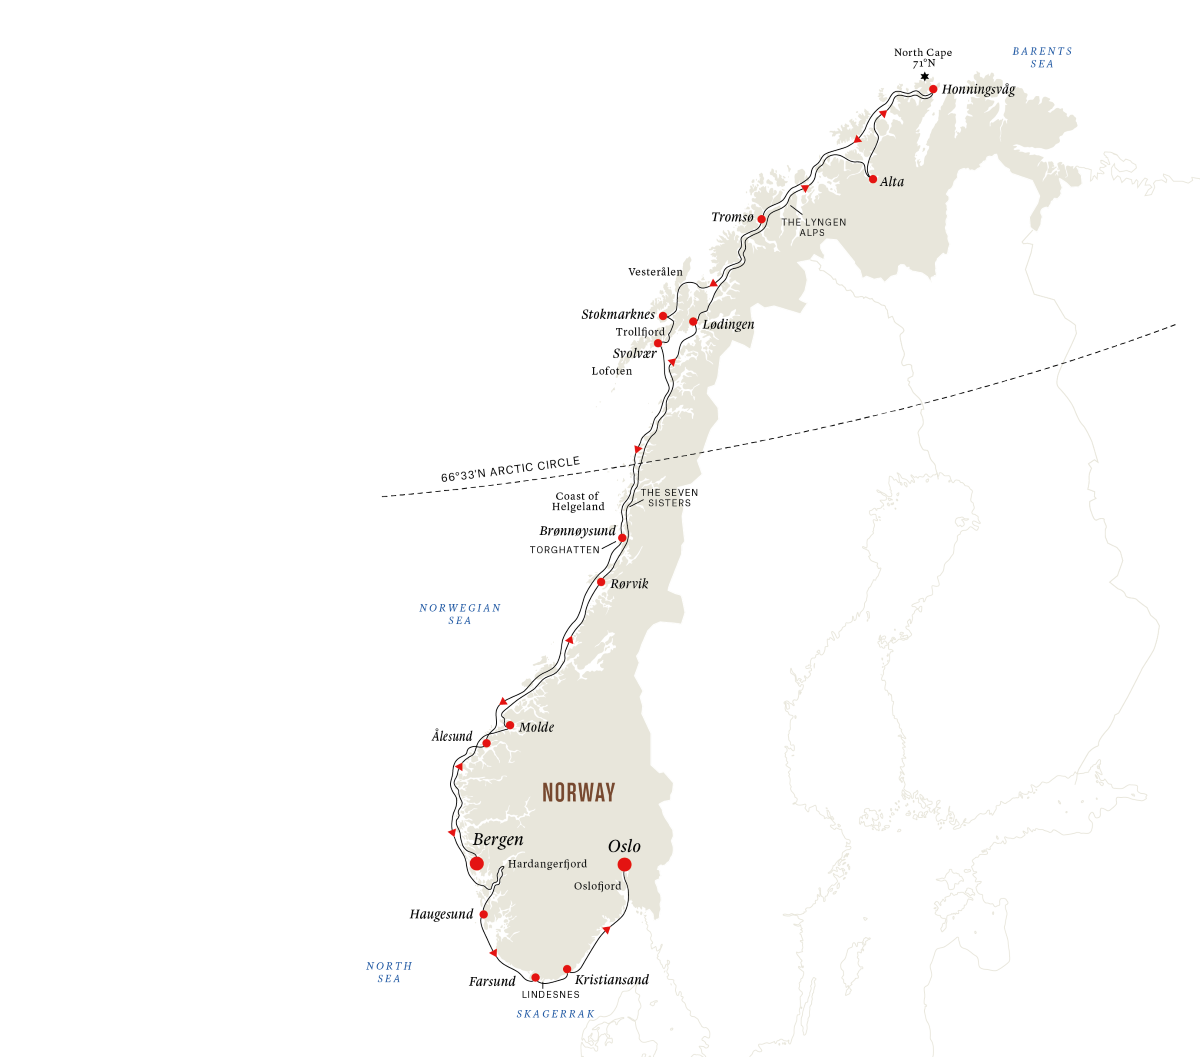 The North Cape Express - Full Voyage from Bergen to Oslo (2024-25)